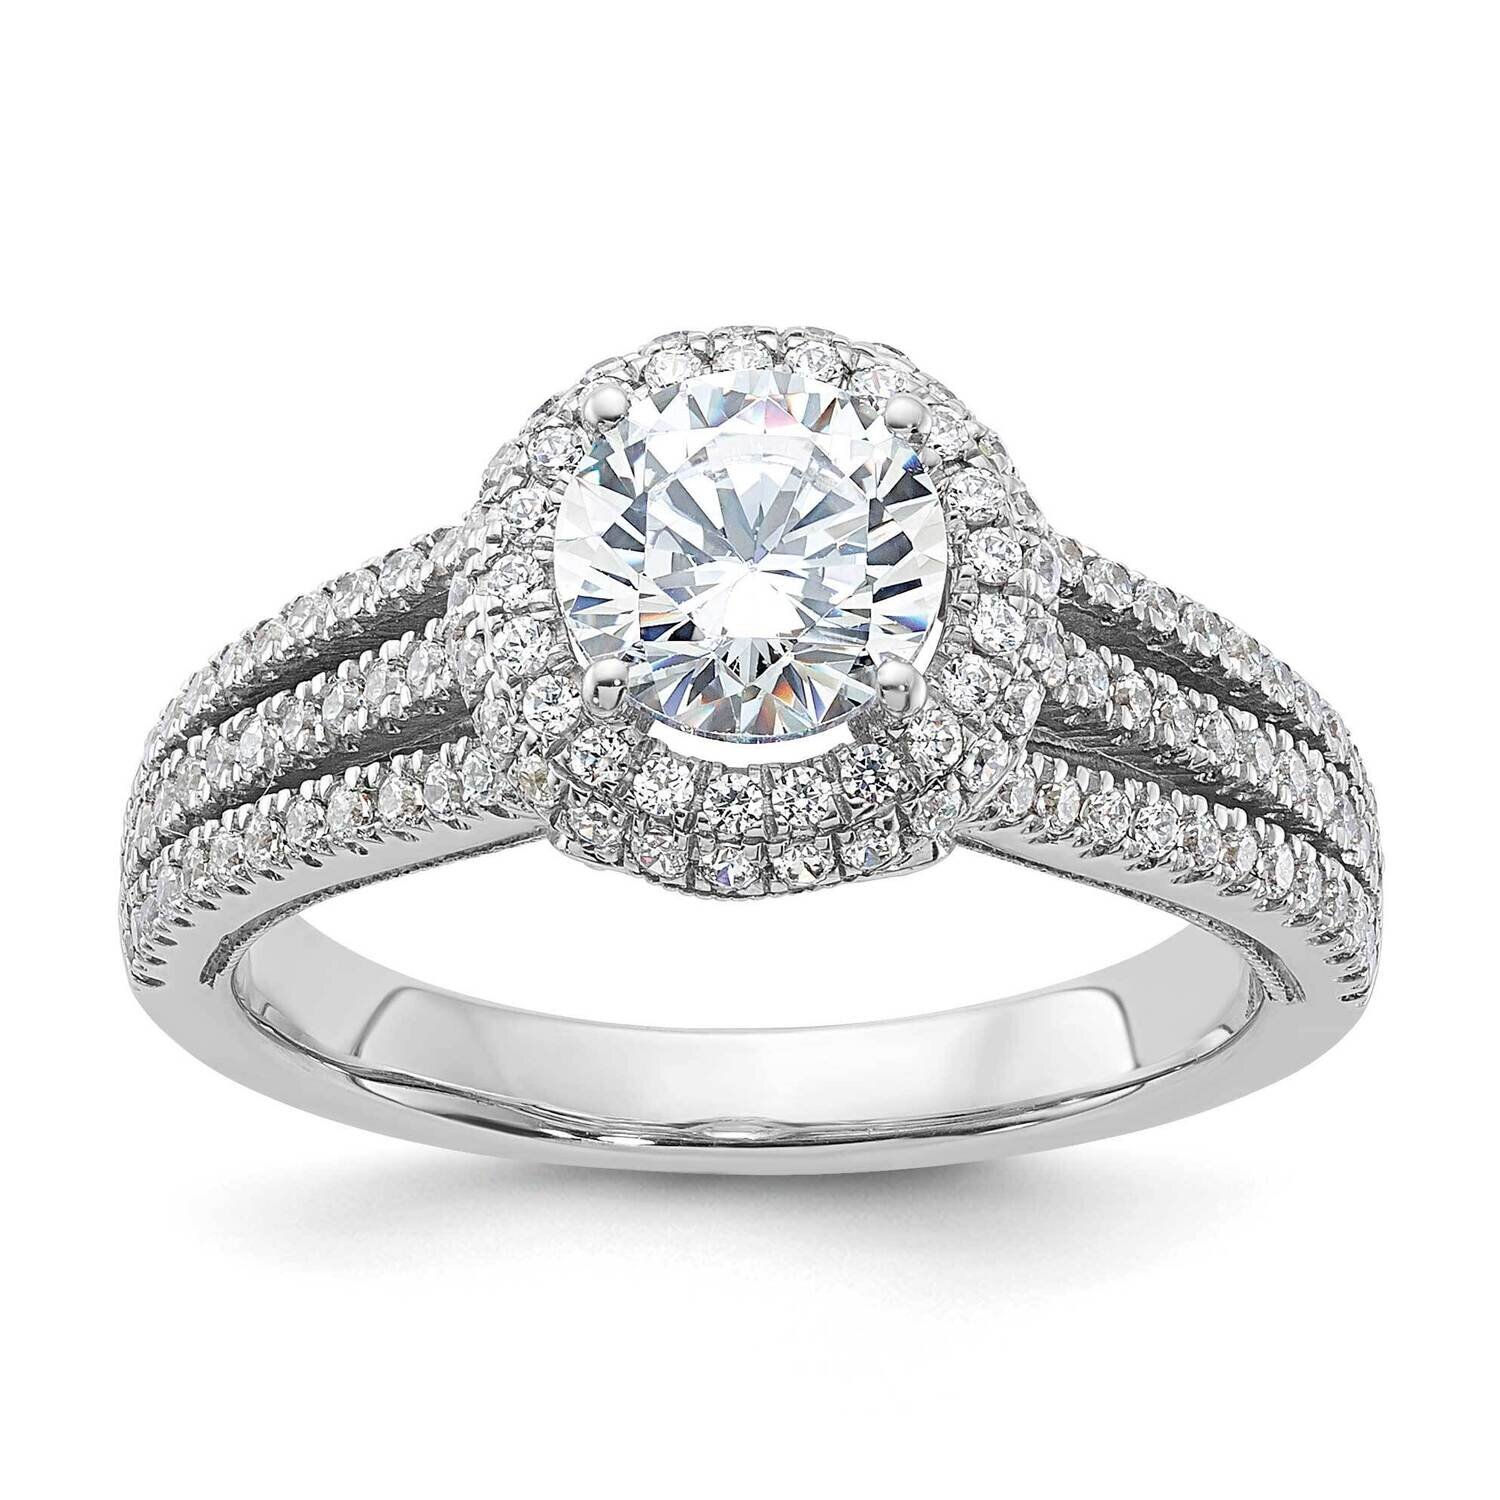 Sterling Silver Polished CZ Round Halo Engagement Ring RM4233-100-SSWCZ-7